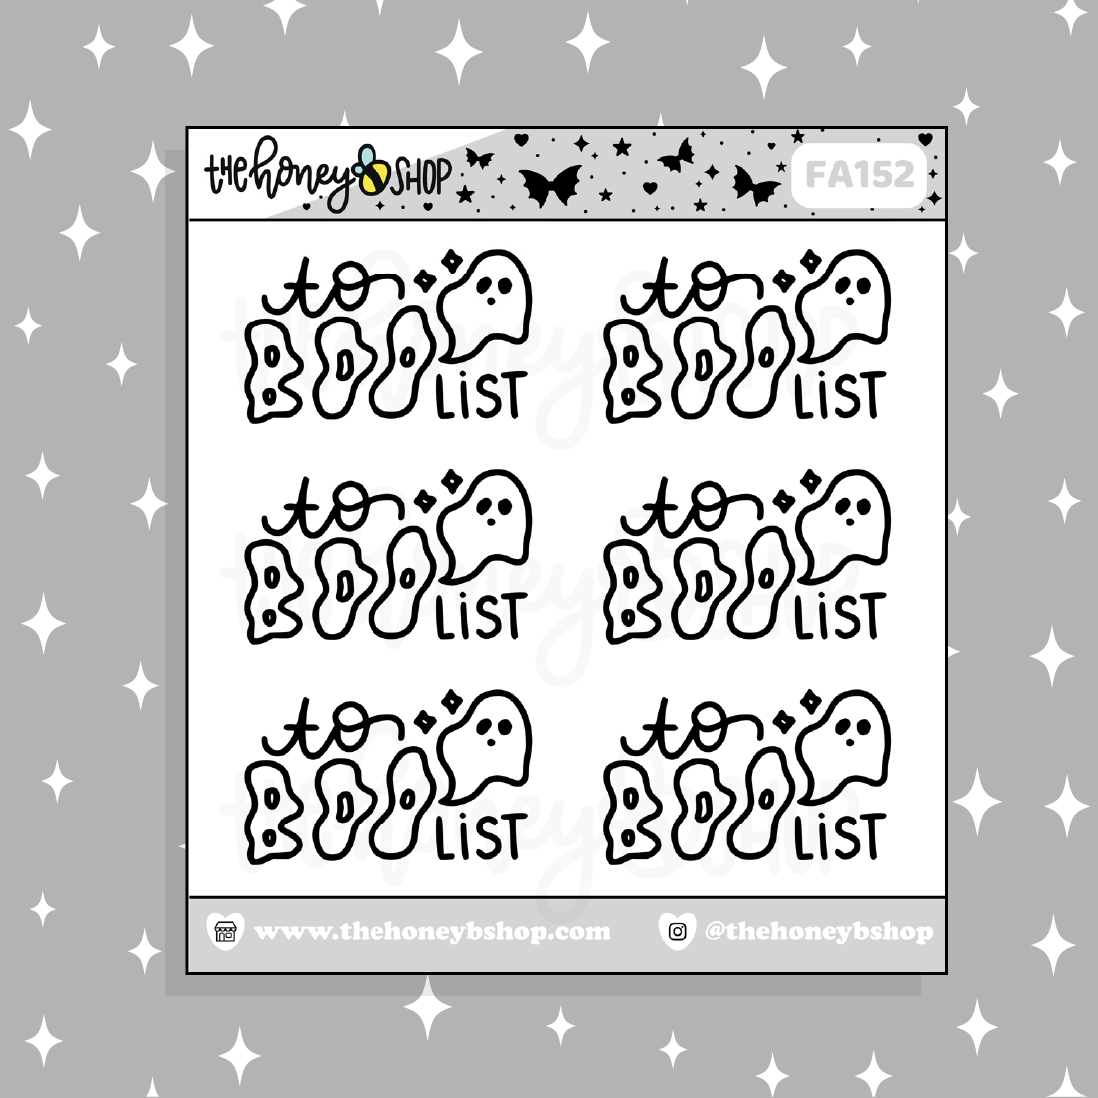 To Boo List Doodle Sticker